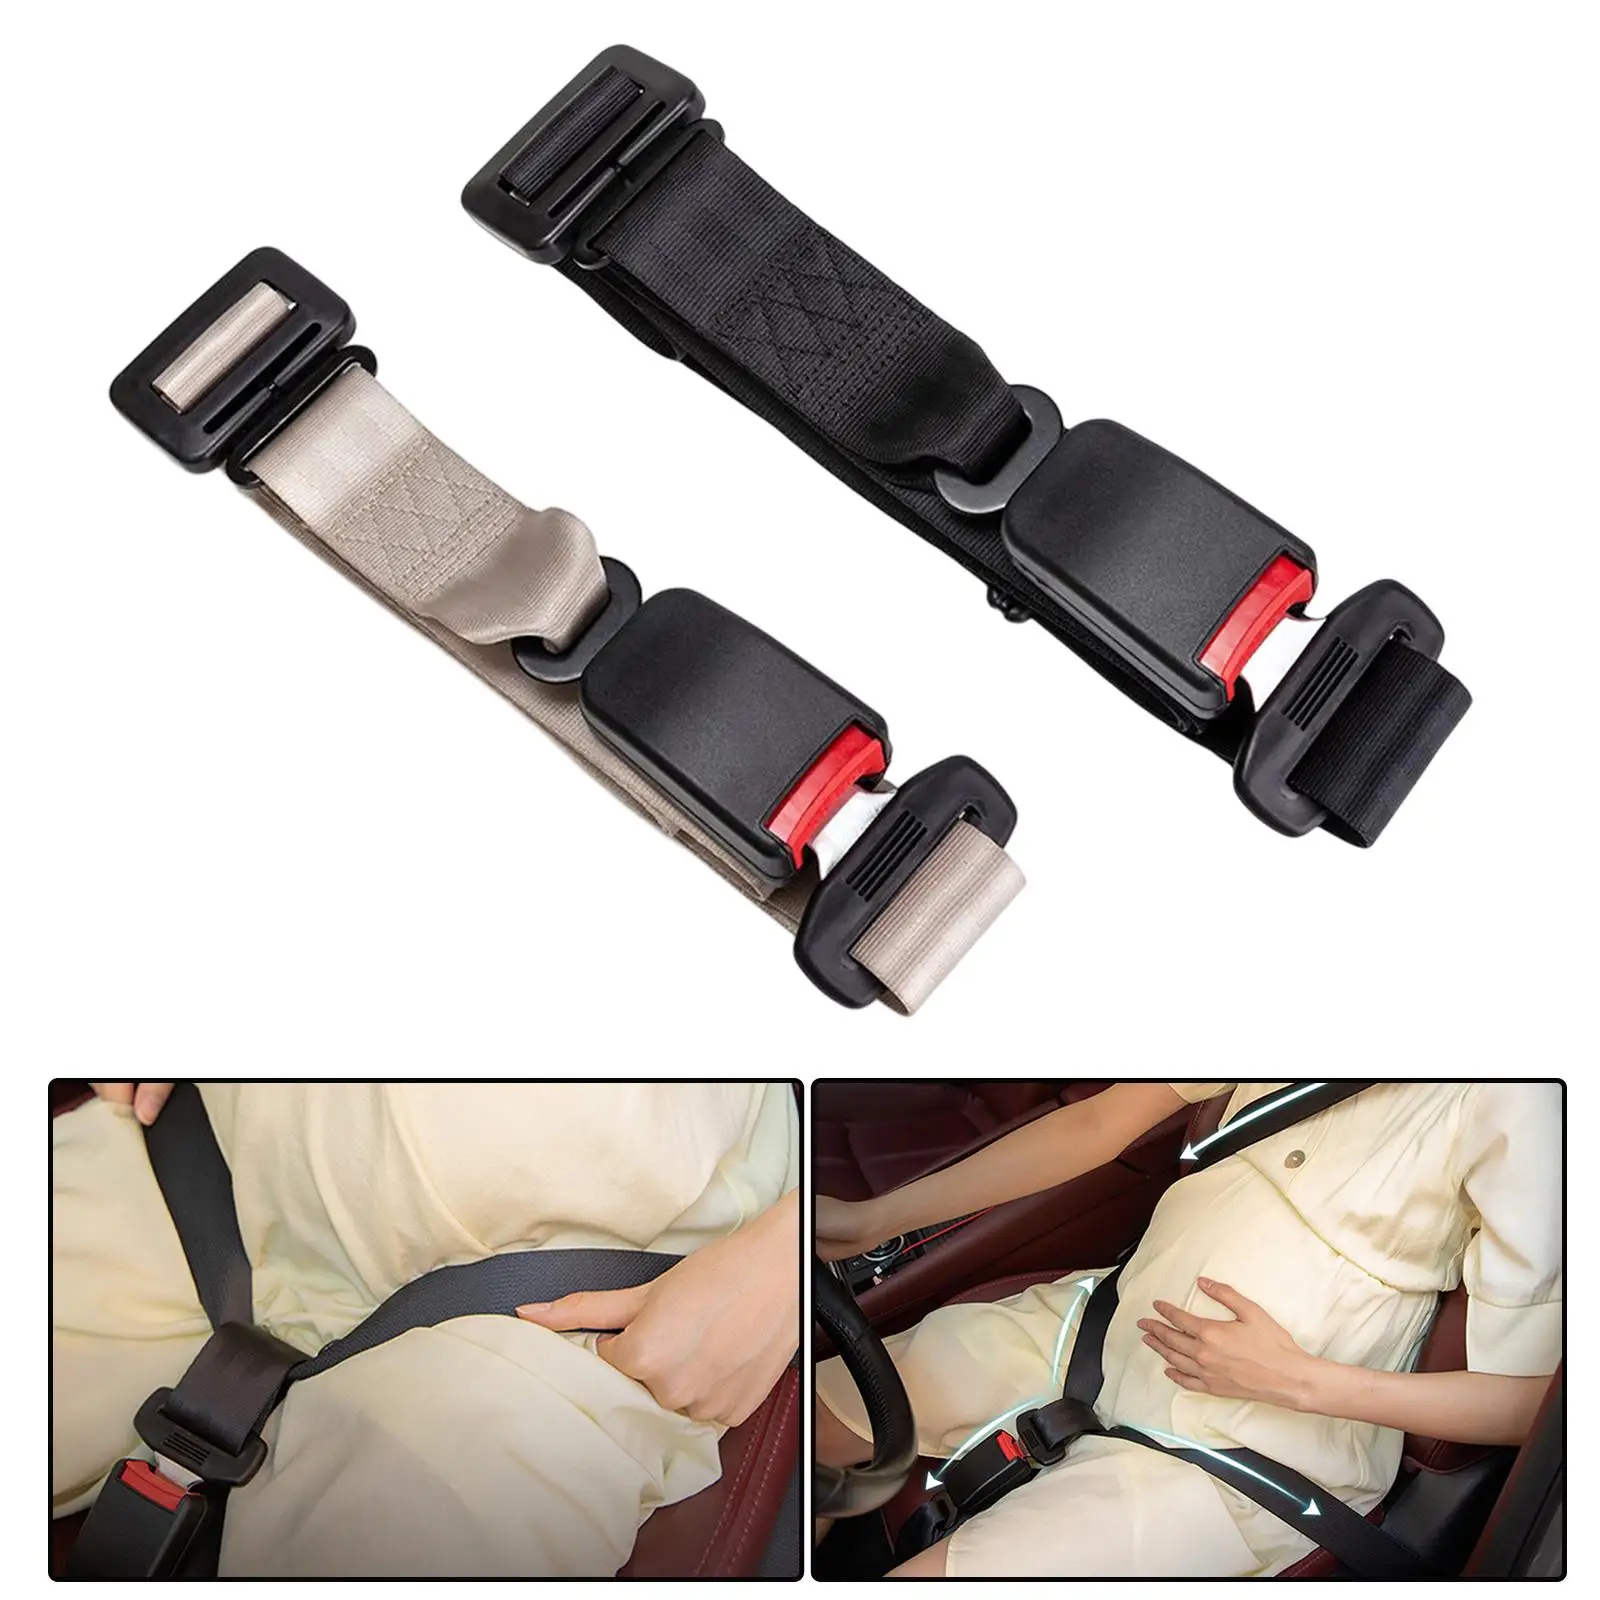 Seat Safety Belt Protect Unborn Baby Adjuster for Woman